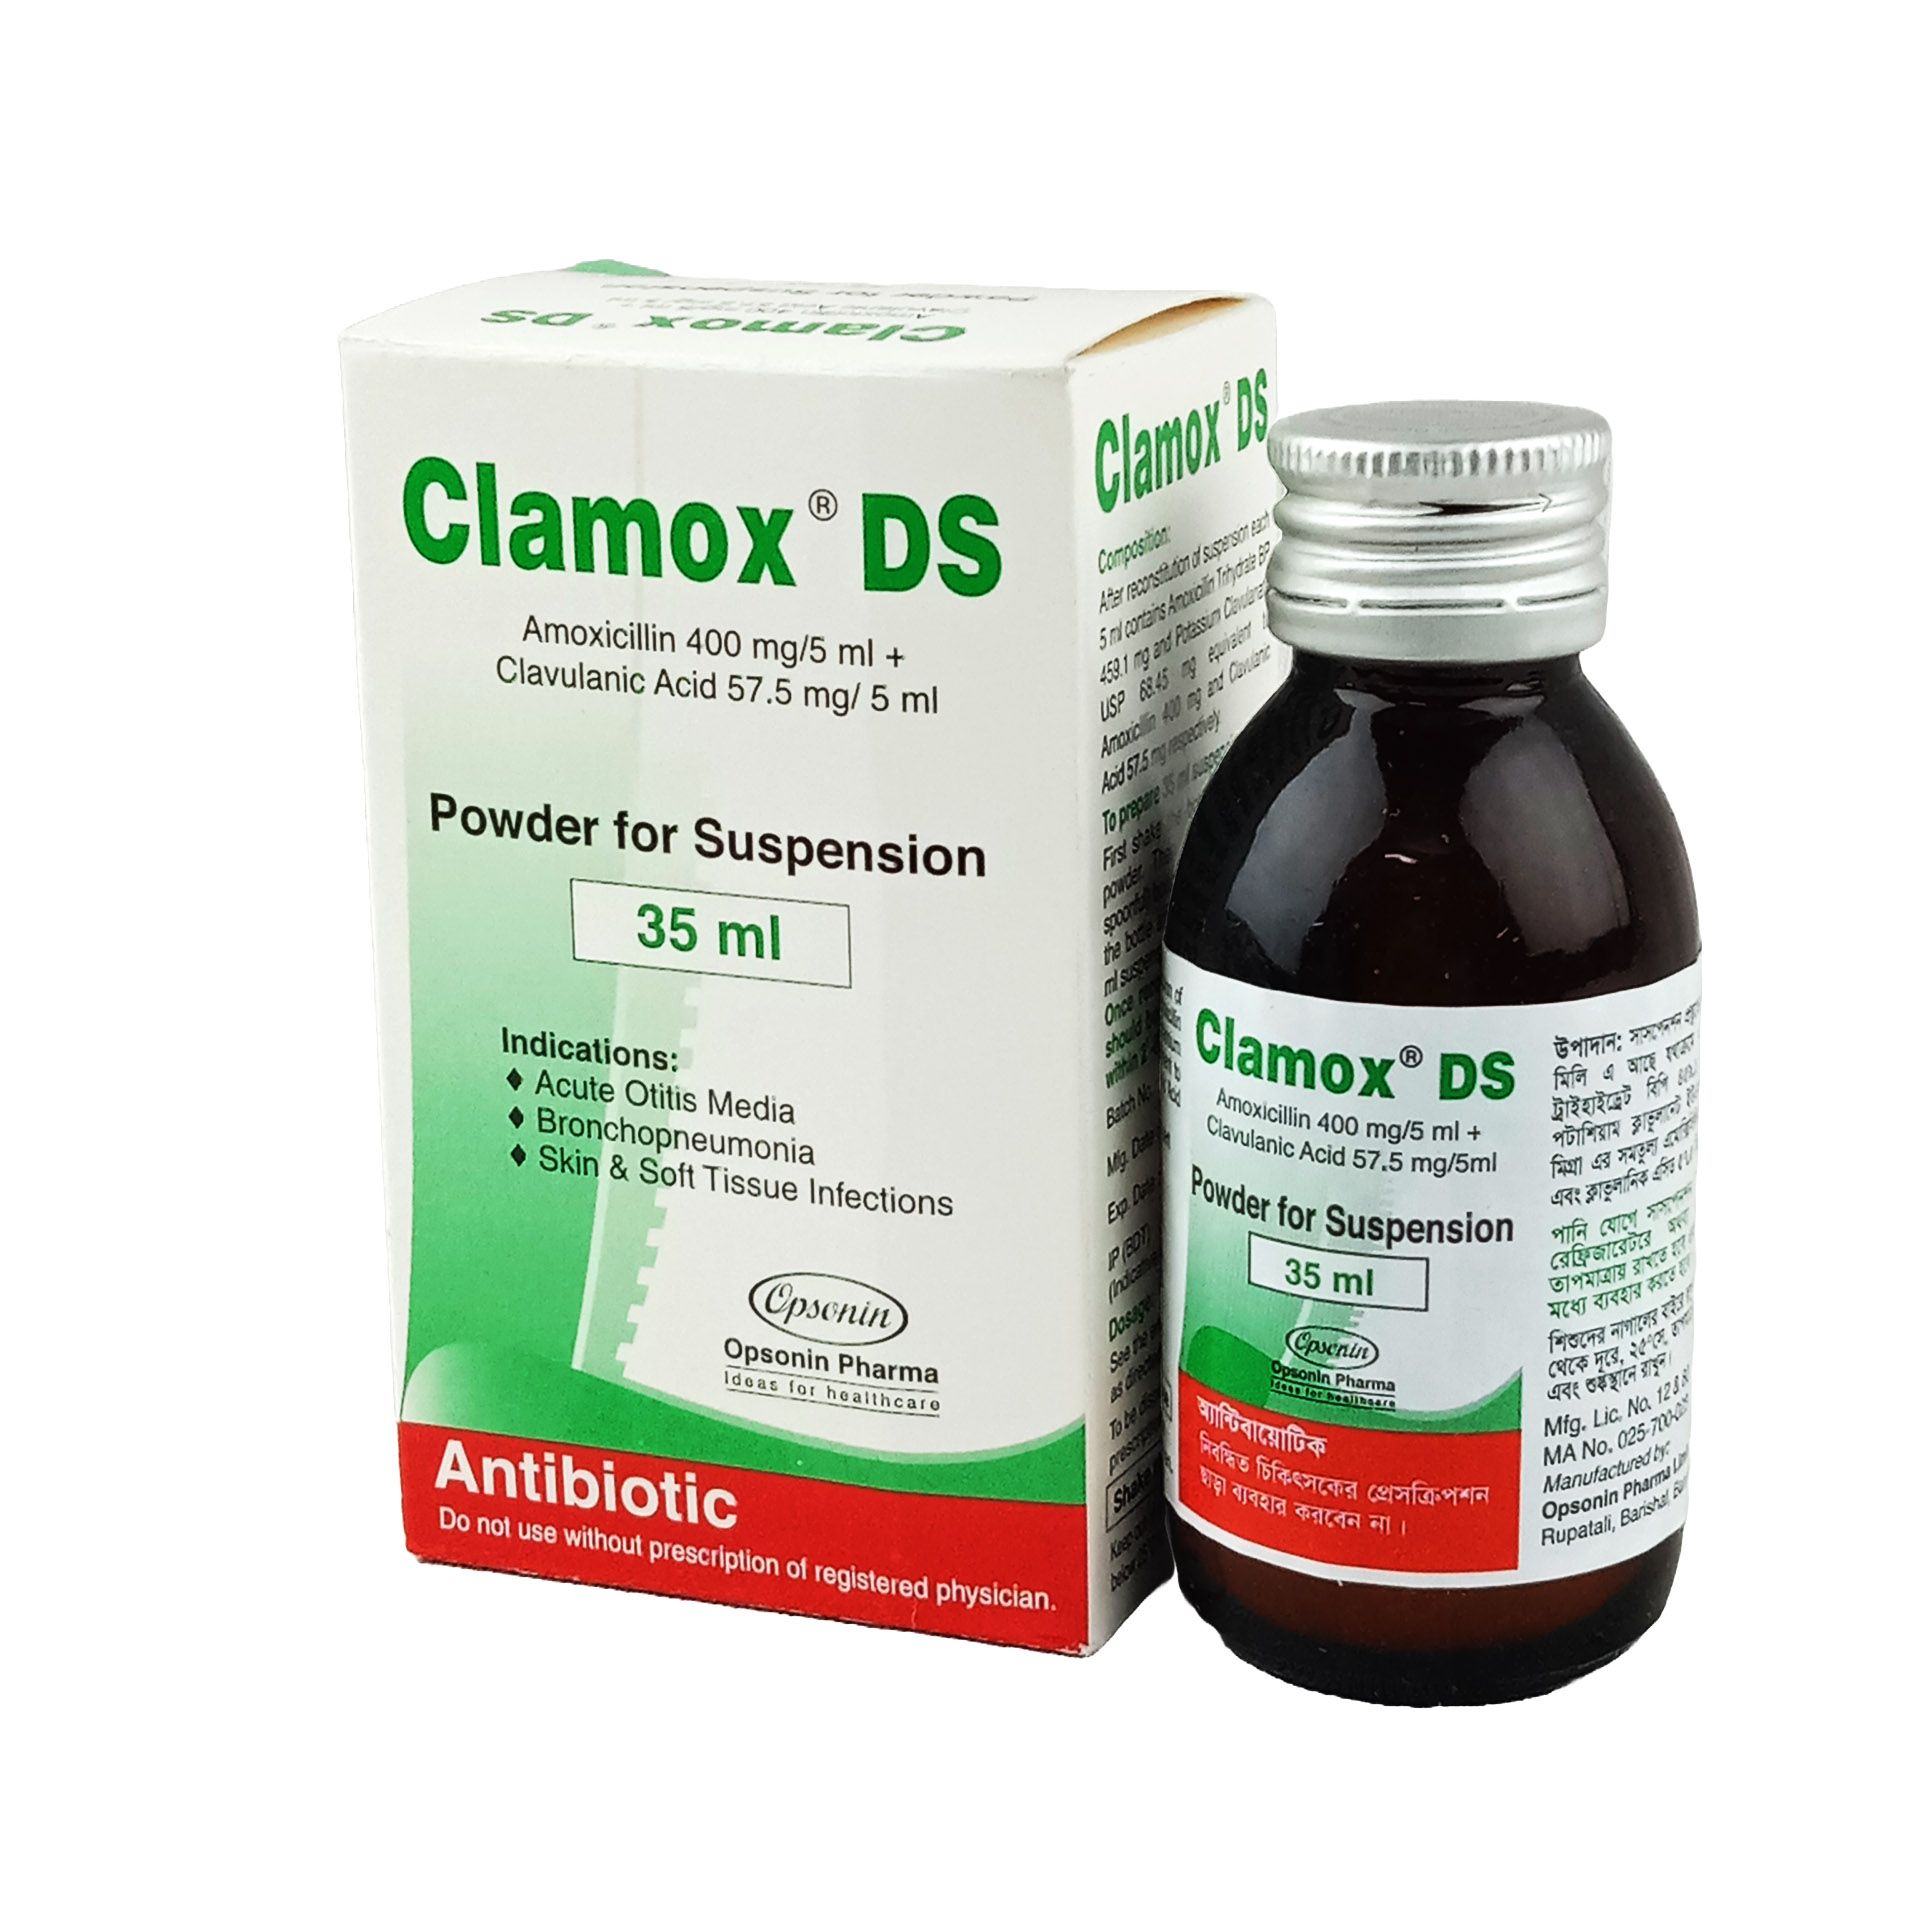 Clamox DS 400mg+57.5mg/5ml Powder for Suspension